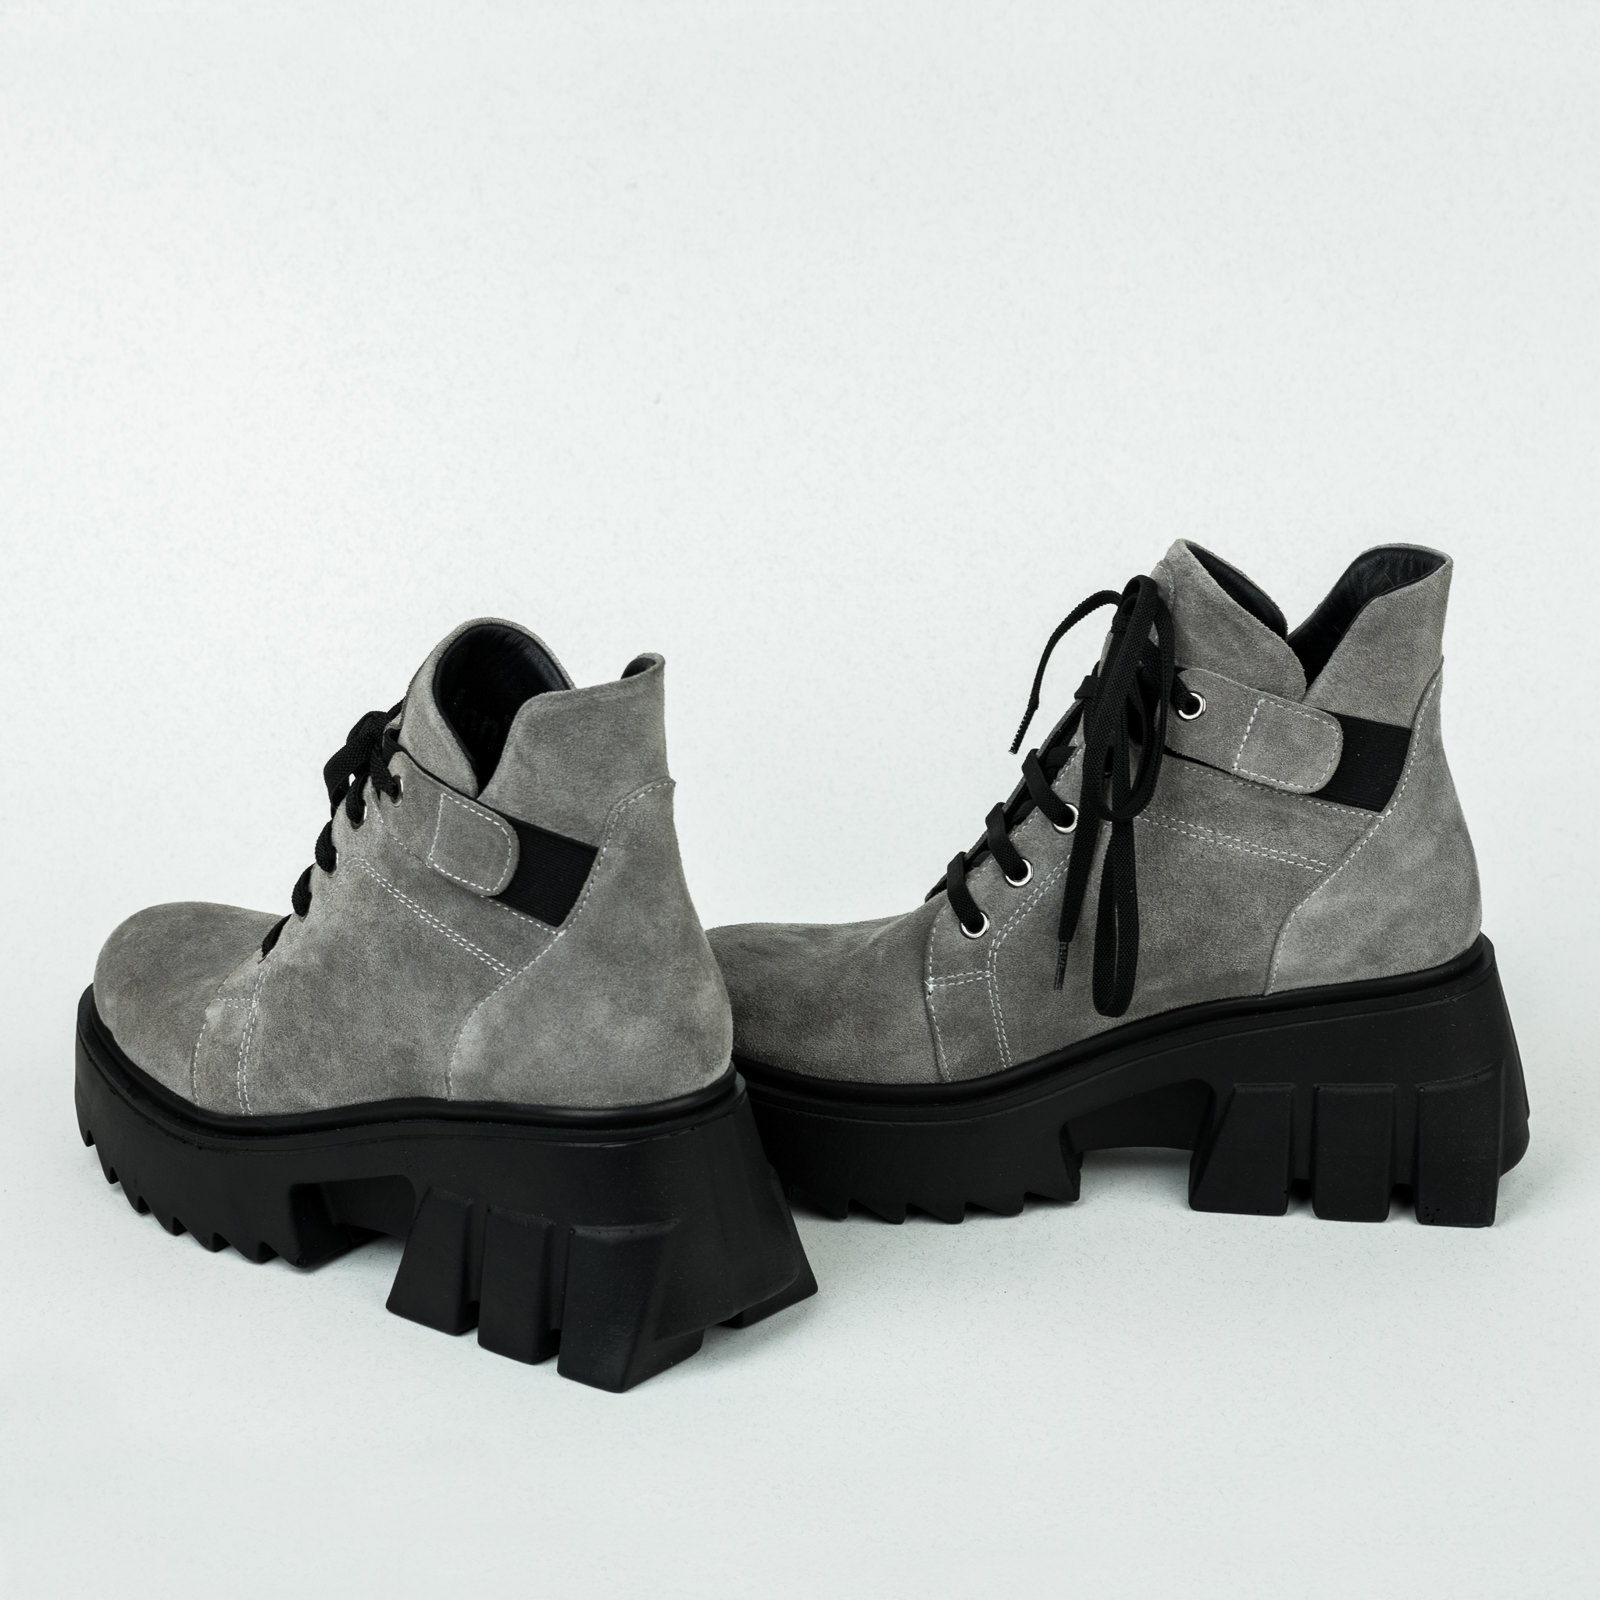 Leather ankle boots B041 - GREY